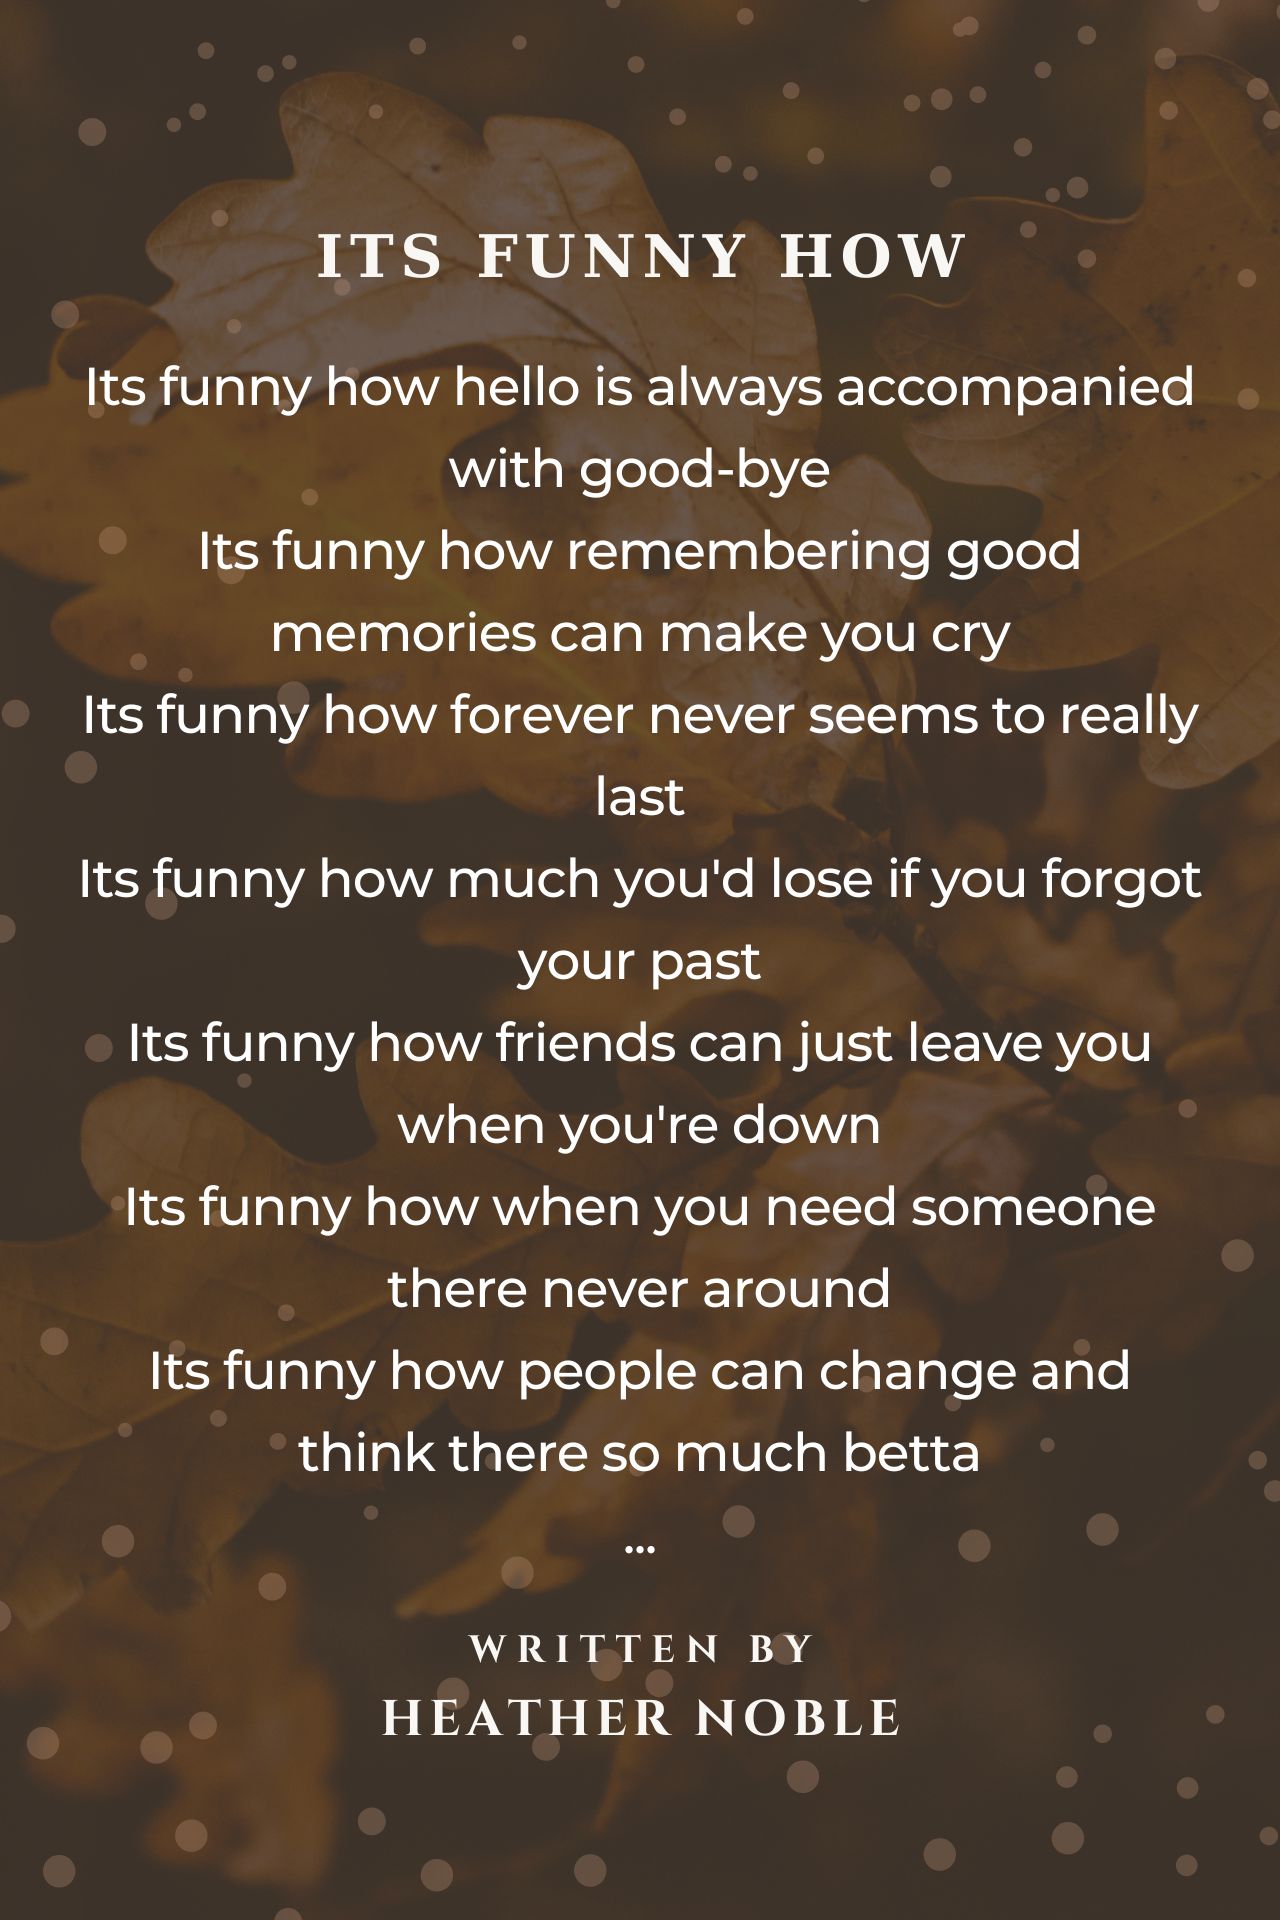 Its Funny How - Its Funny How Poem by Heather Noble